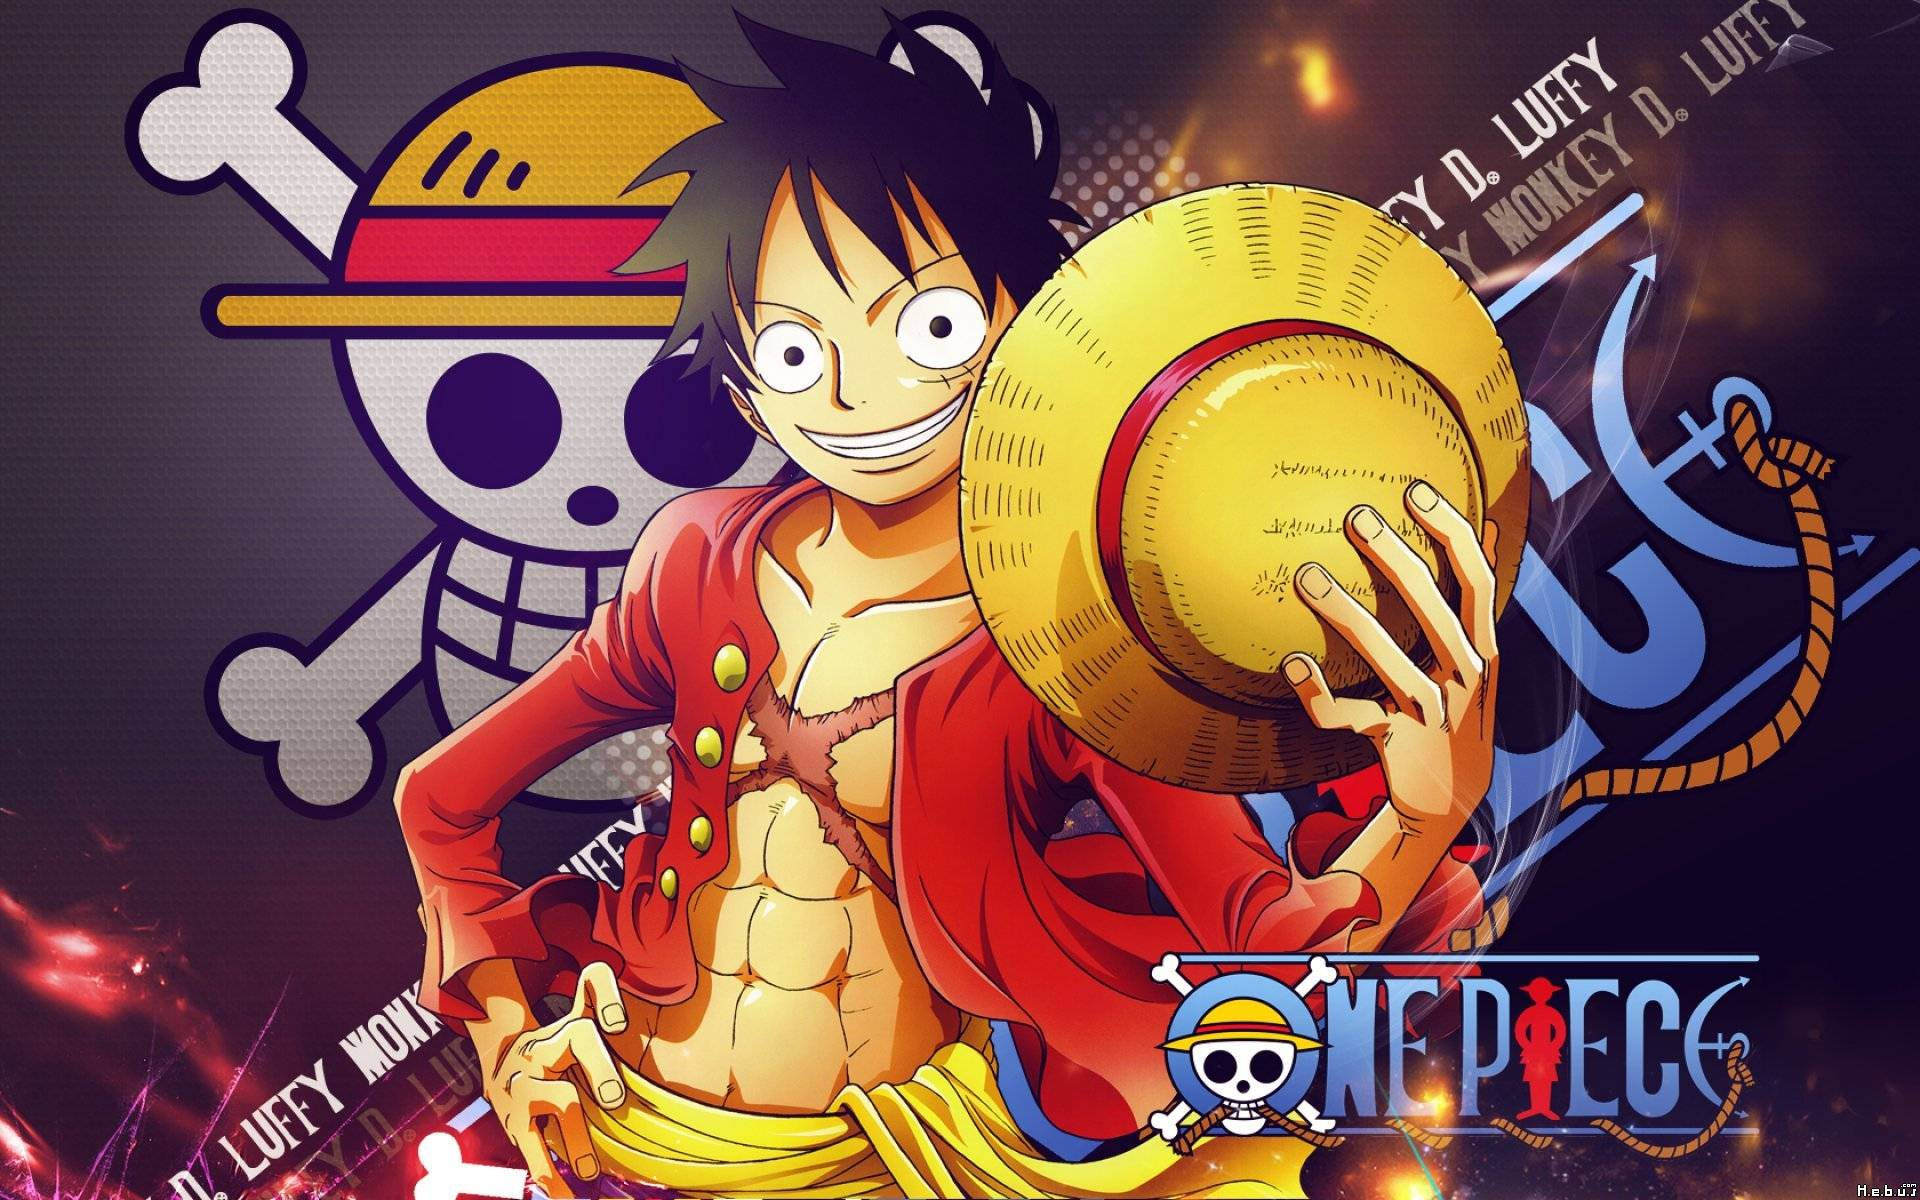 Top 999+ Luffy Wallpapers Full HD, 4K✅Free to Use